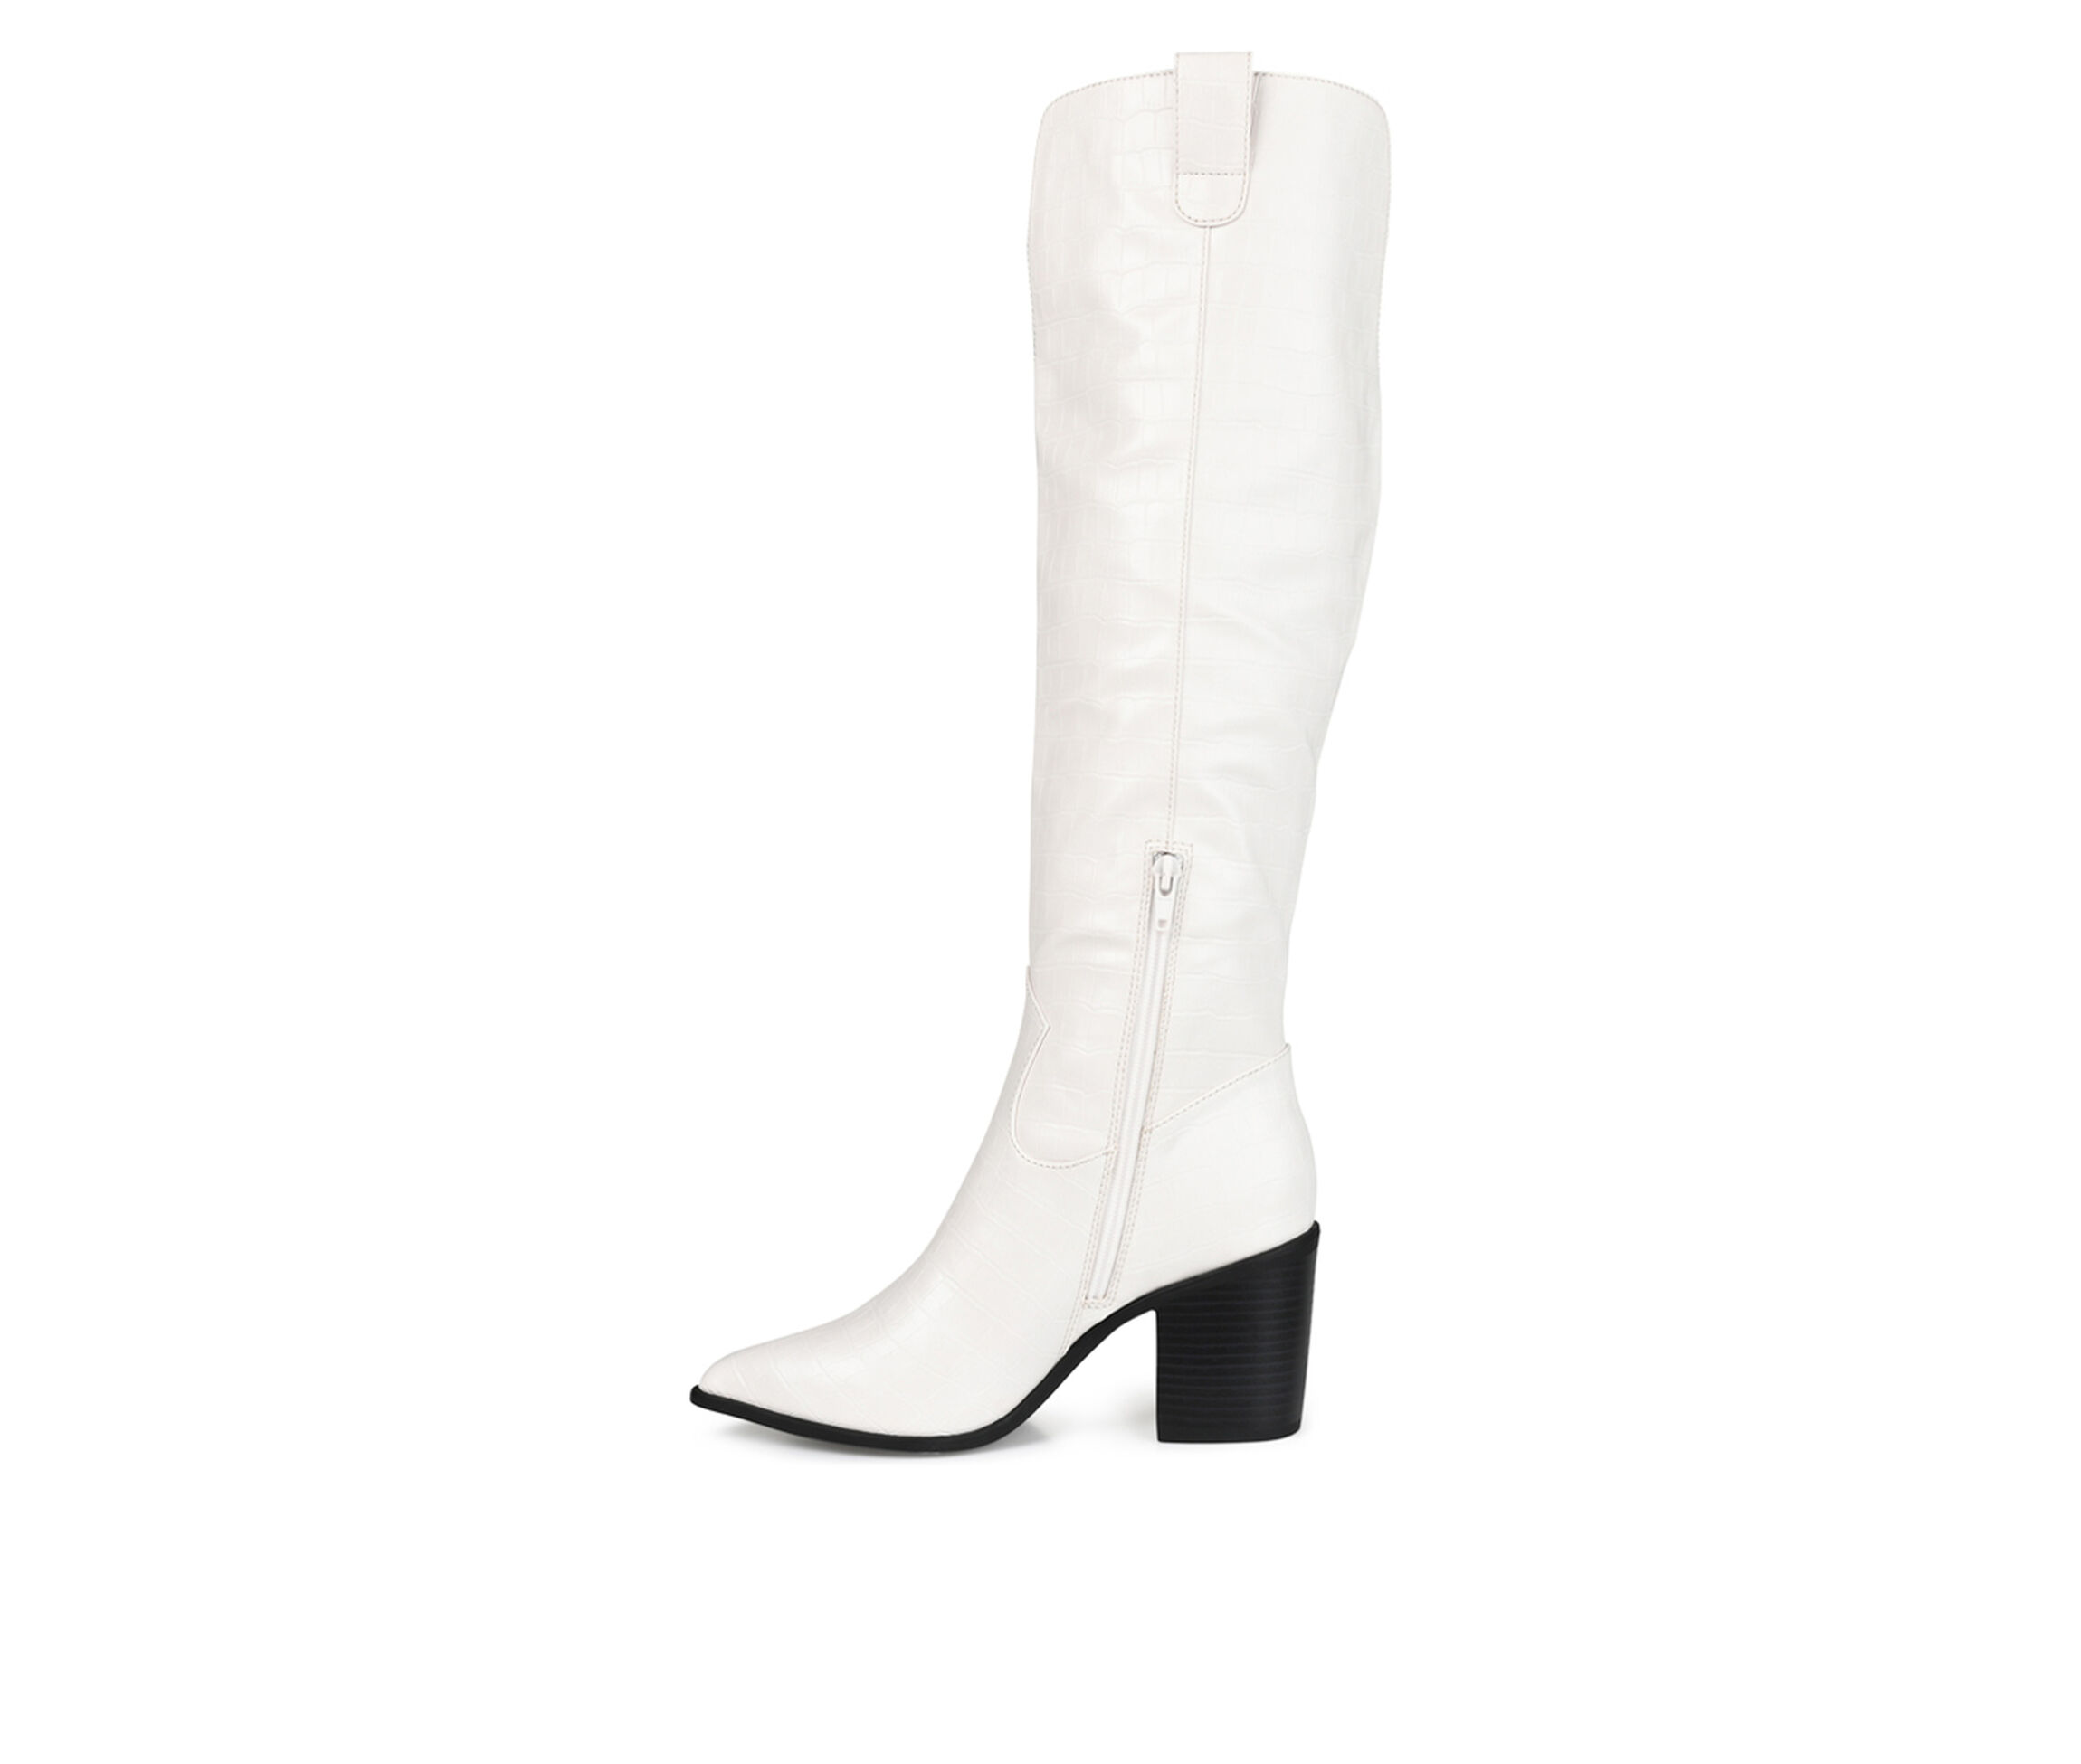 Women's Journee Collection Therese Wide Calf Over-The-Knee Boot in Bone Size 6.5 Medium